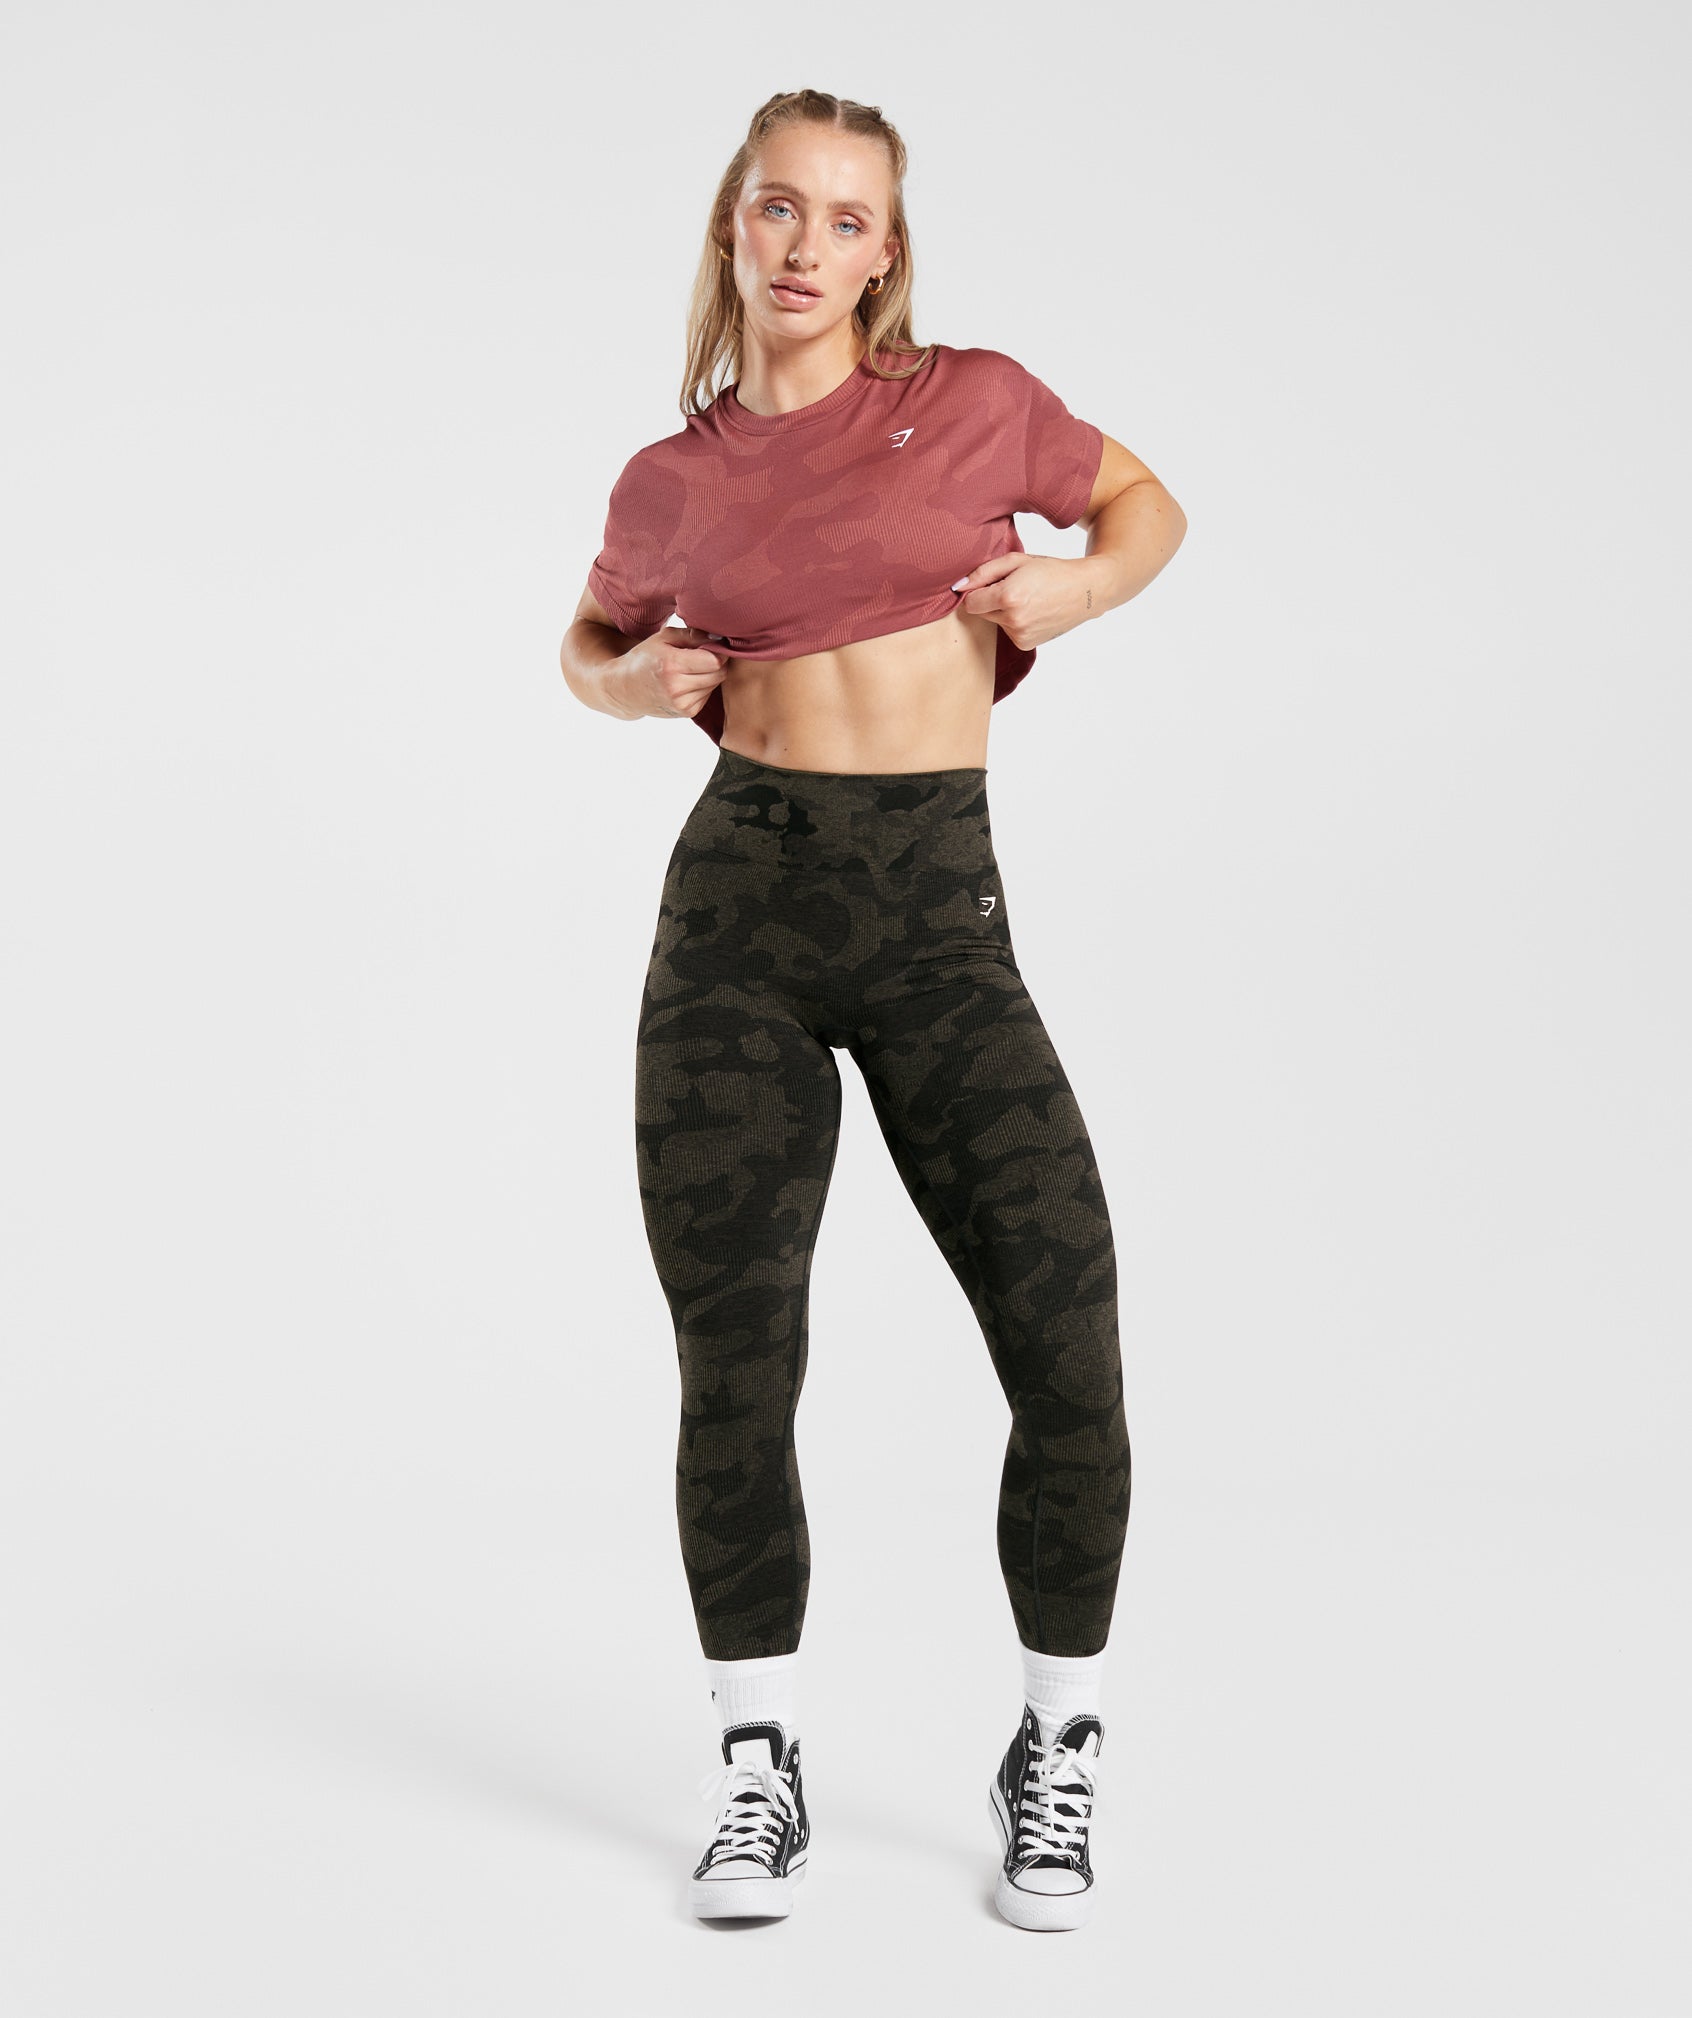 Adapt Camo Seamless Ribbed Crop Top in Soft Berry/Sunbaked Pink - view 4